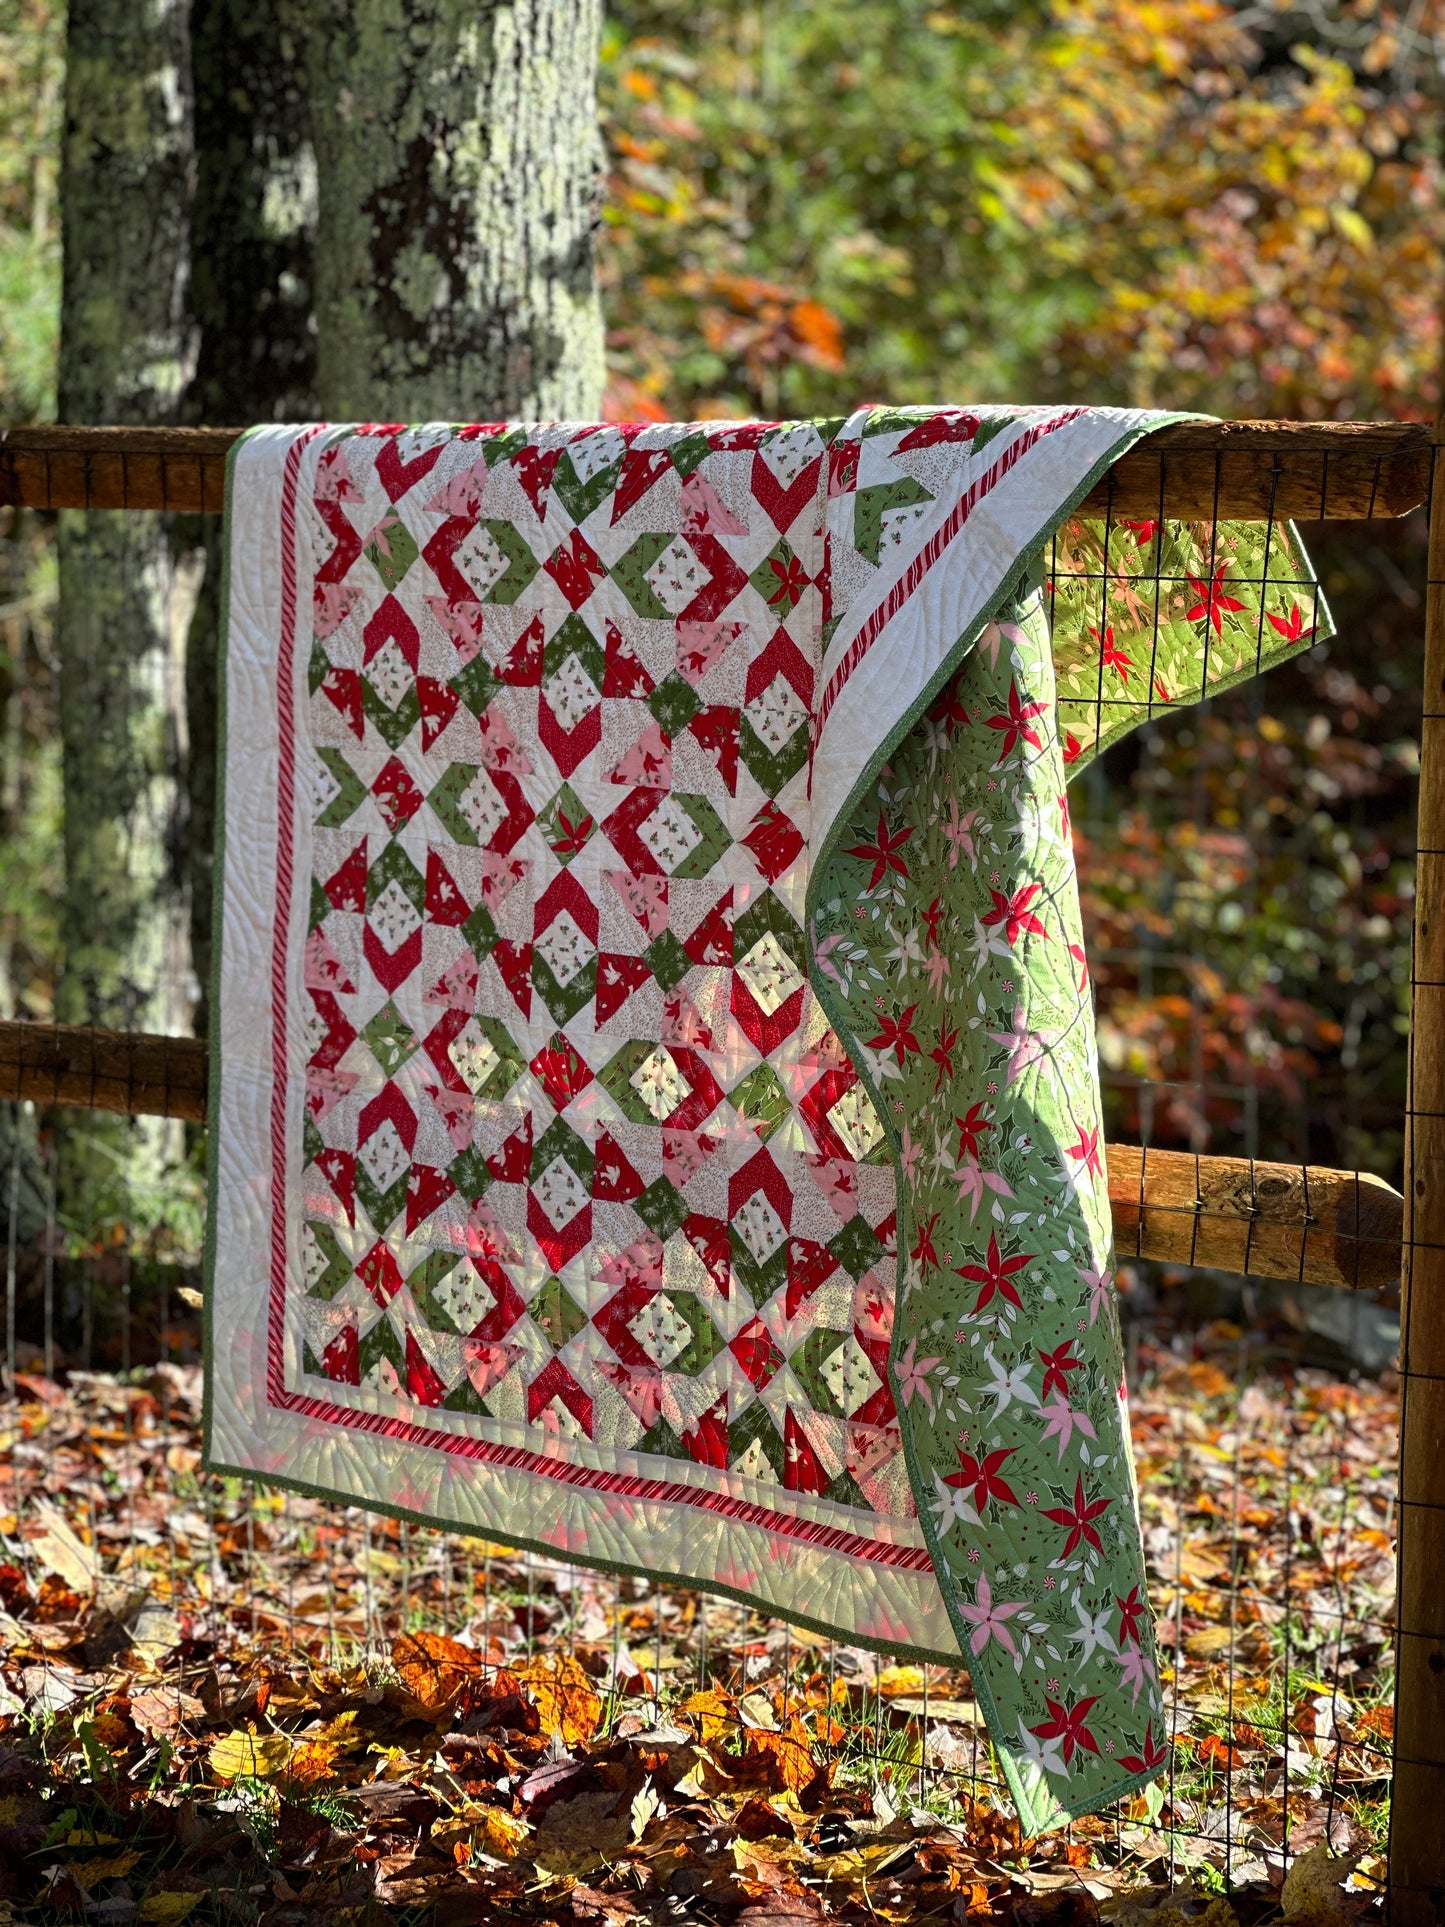 NEW! Once Upon a Christmas "Holly Garland" Quilt Pattern (Downloadable PDF)